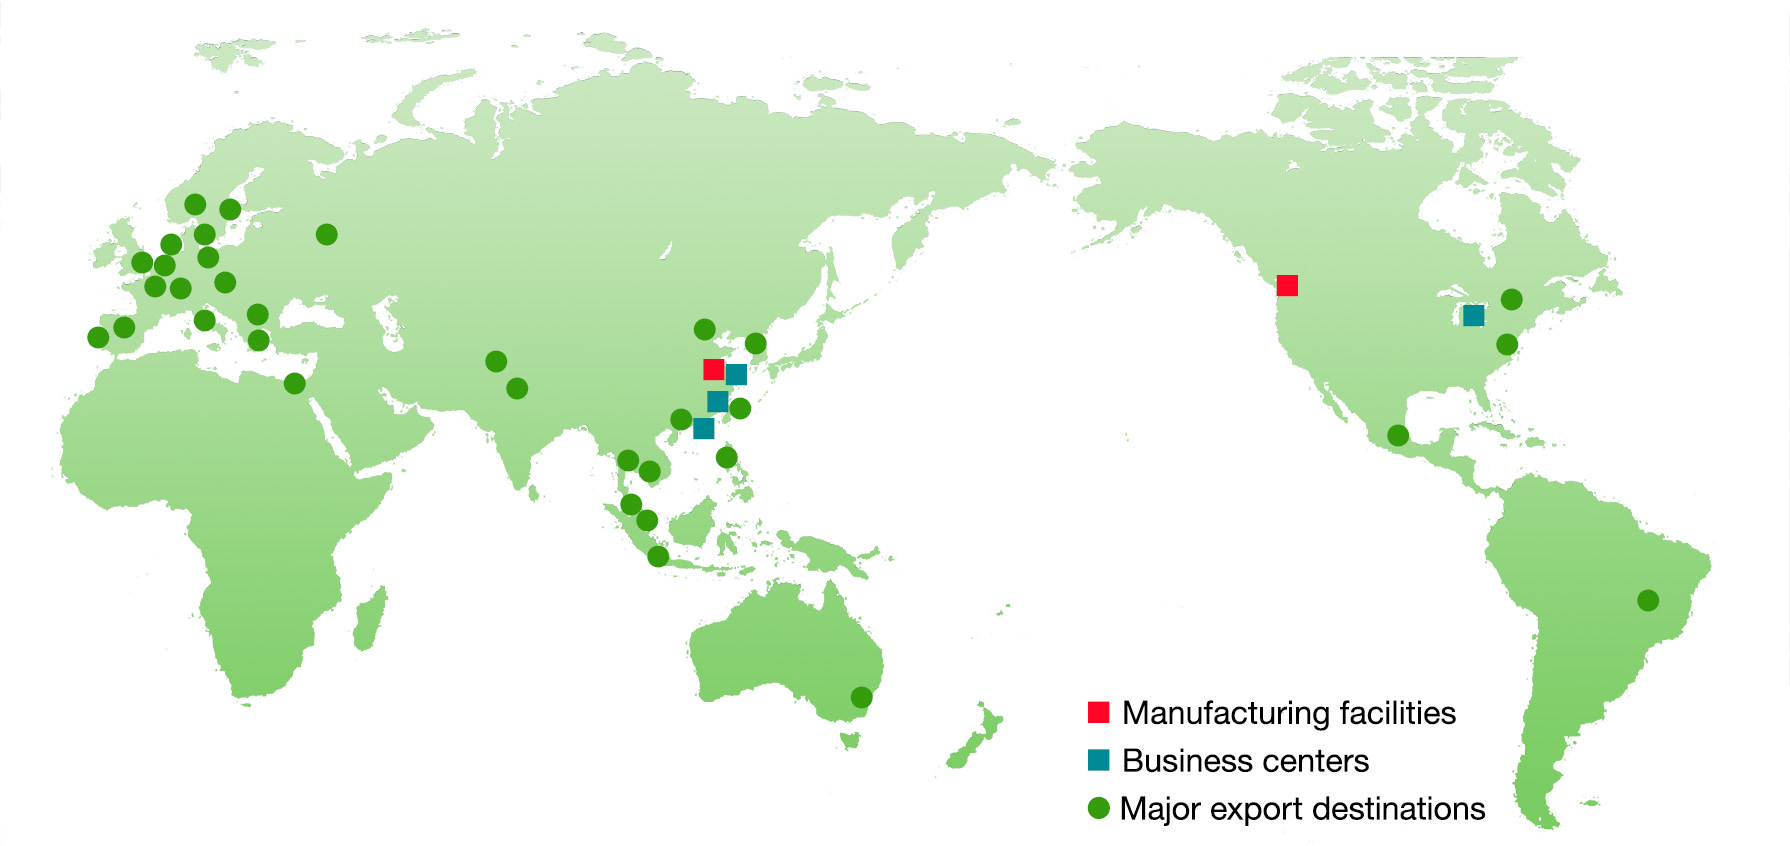 Achilles businesses are active around the world